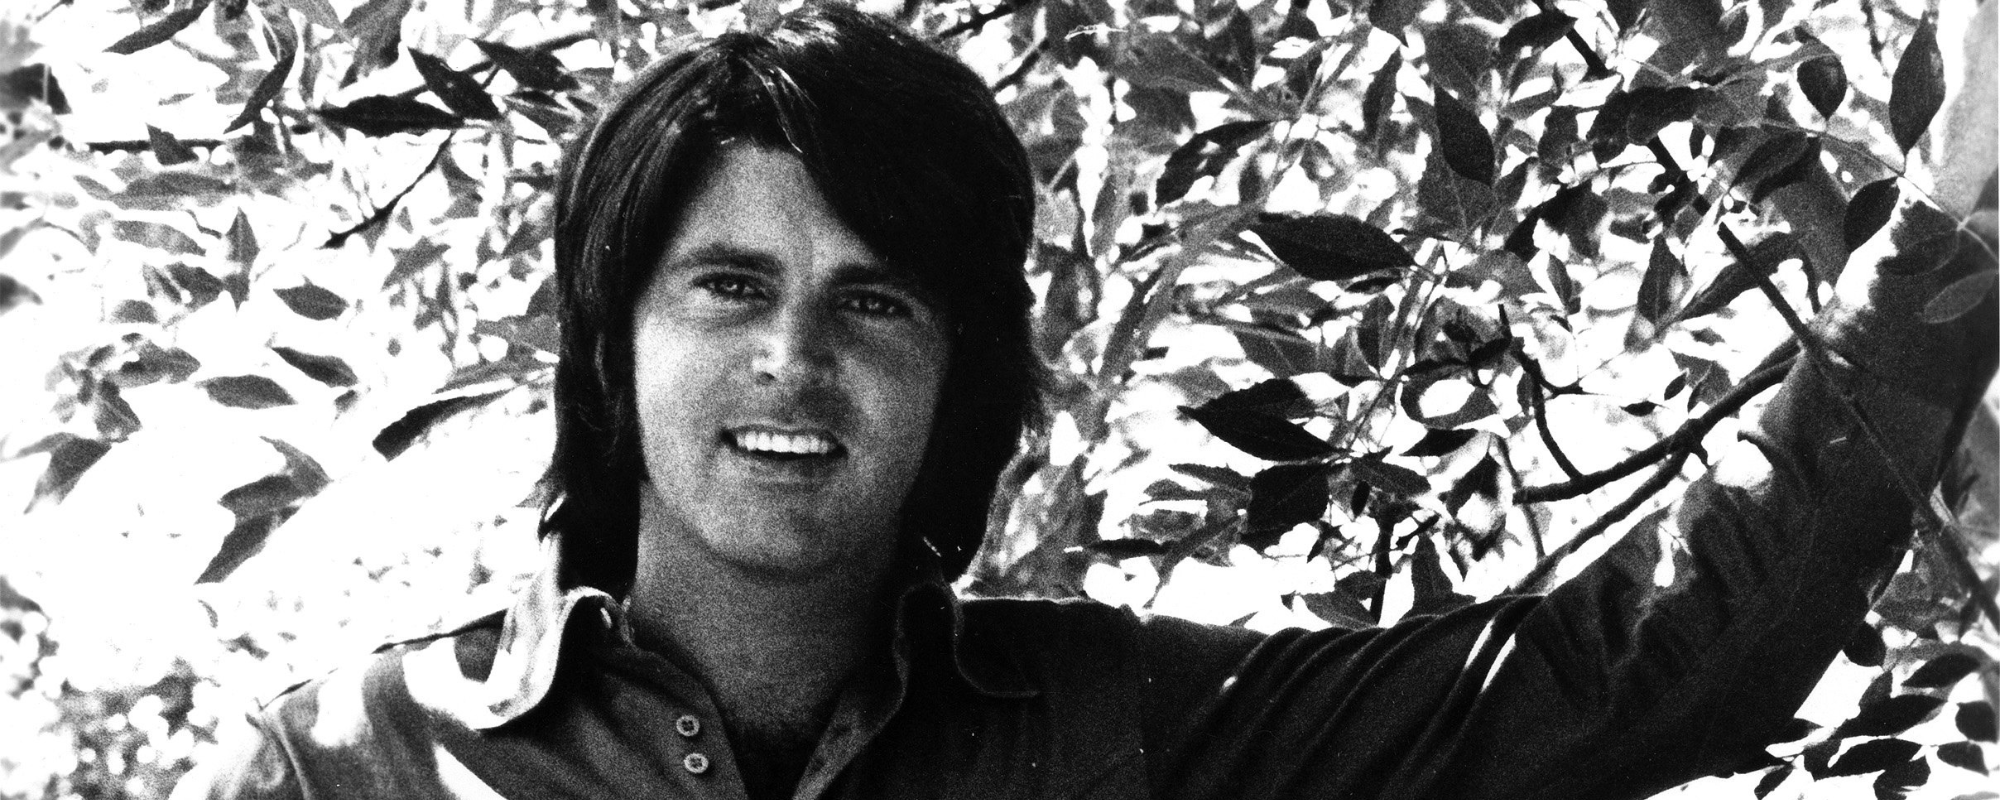 The Meaning Behind “Garden Party” by Rick Nelson